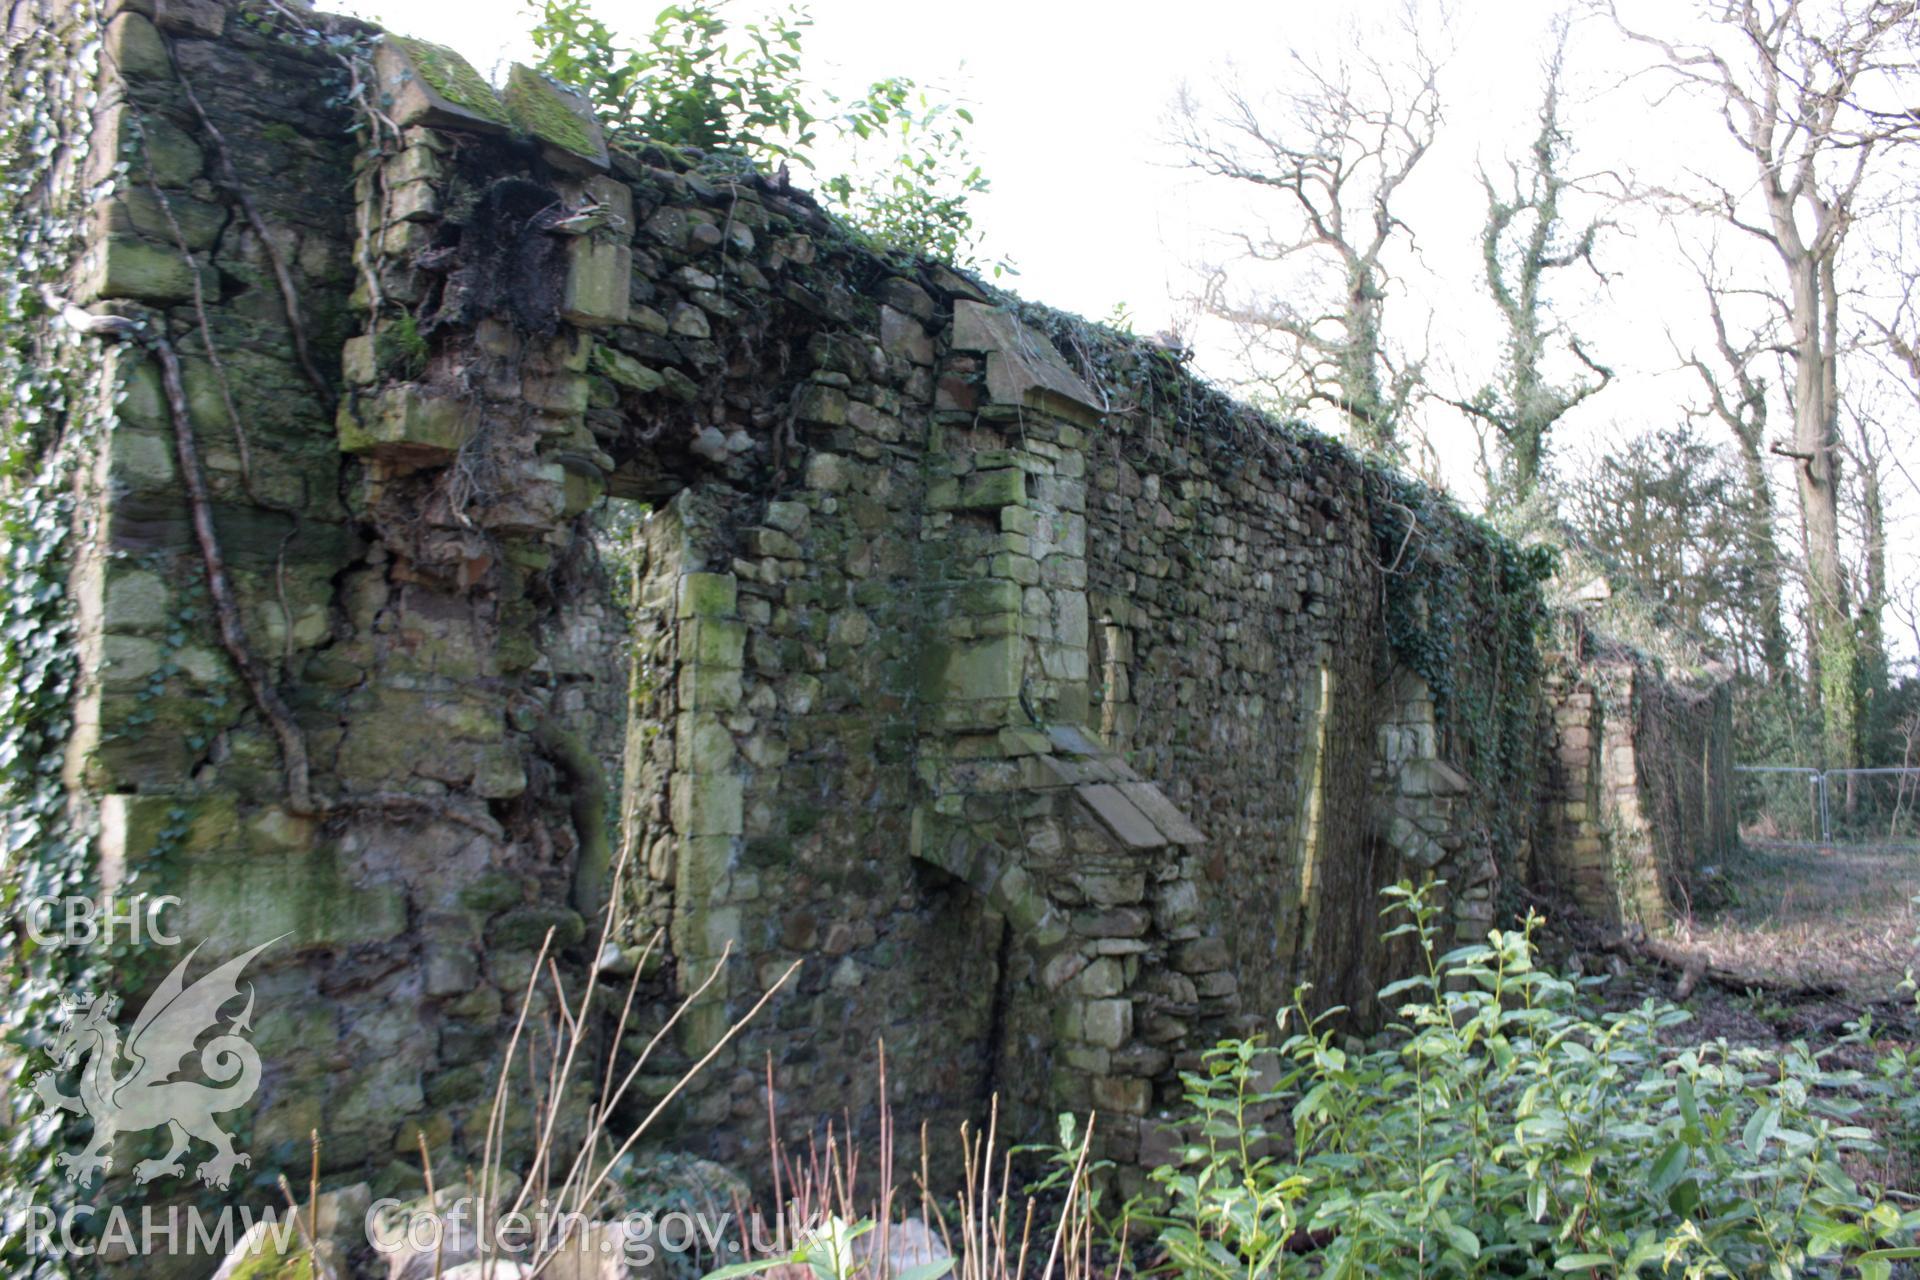 External; east end of north elevation showing collapses buttress and subsiding wall